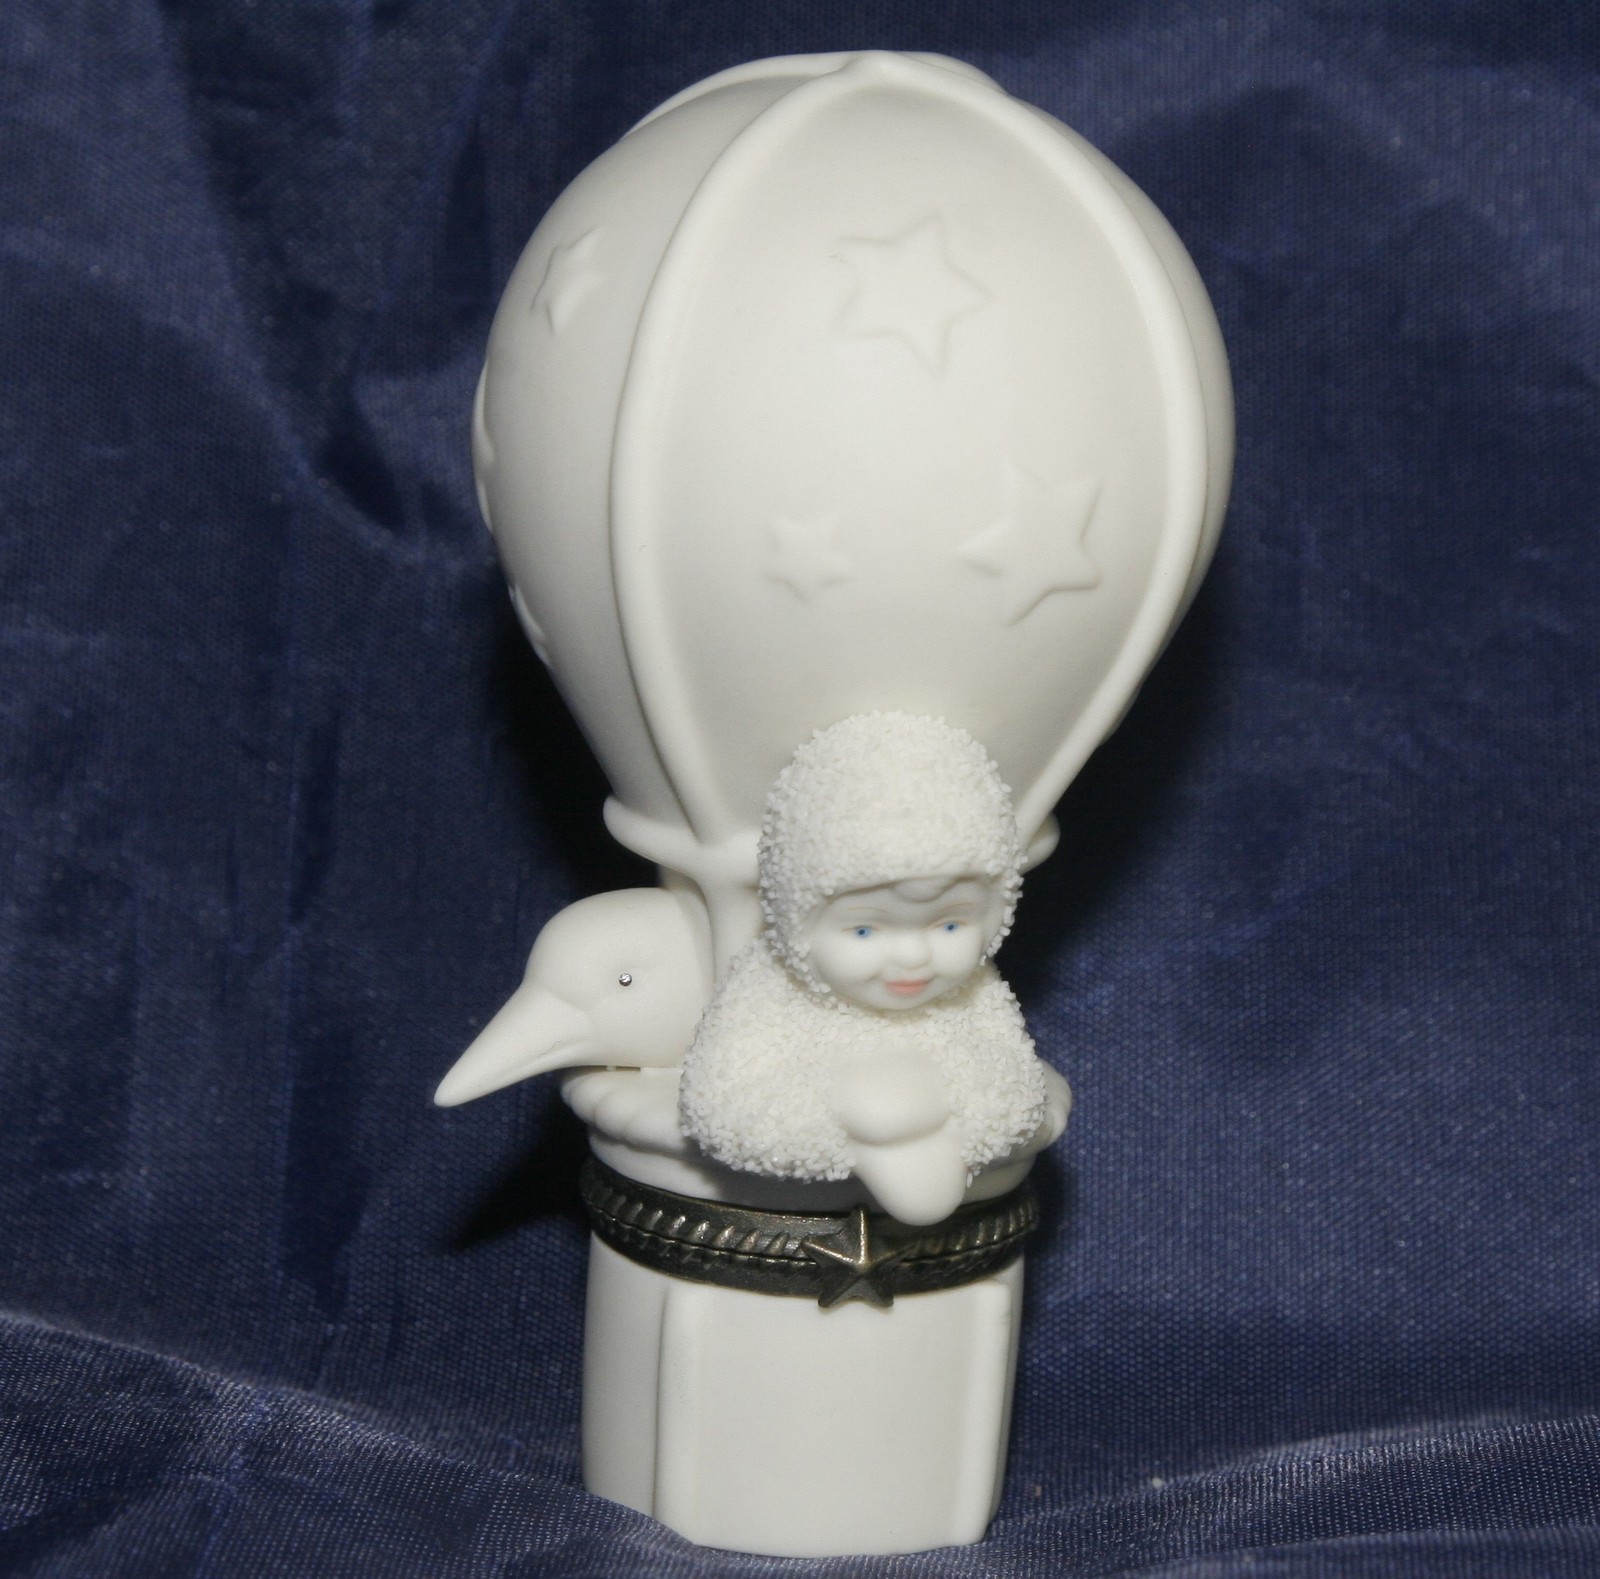 Primary image for Dept 56 Snowbabies "FLY WITH ME" Bisque Hinged Trinket Box 1999